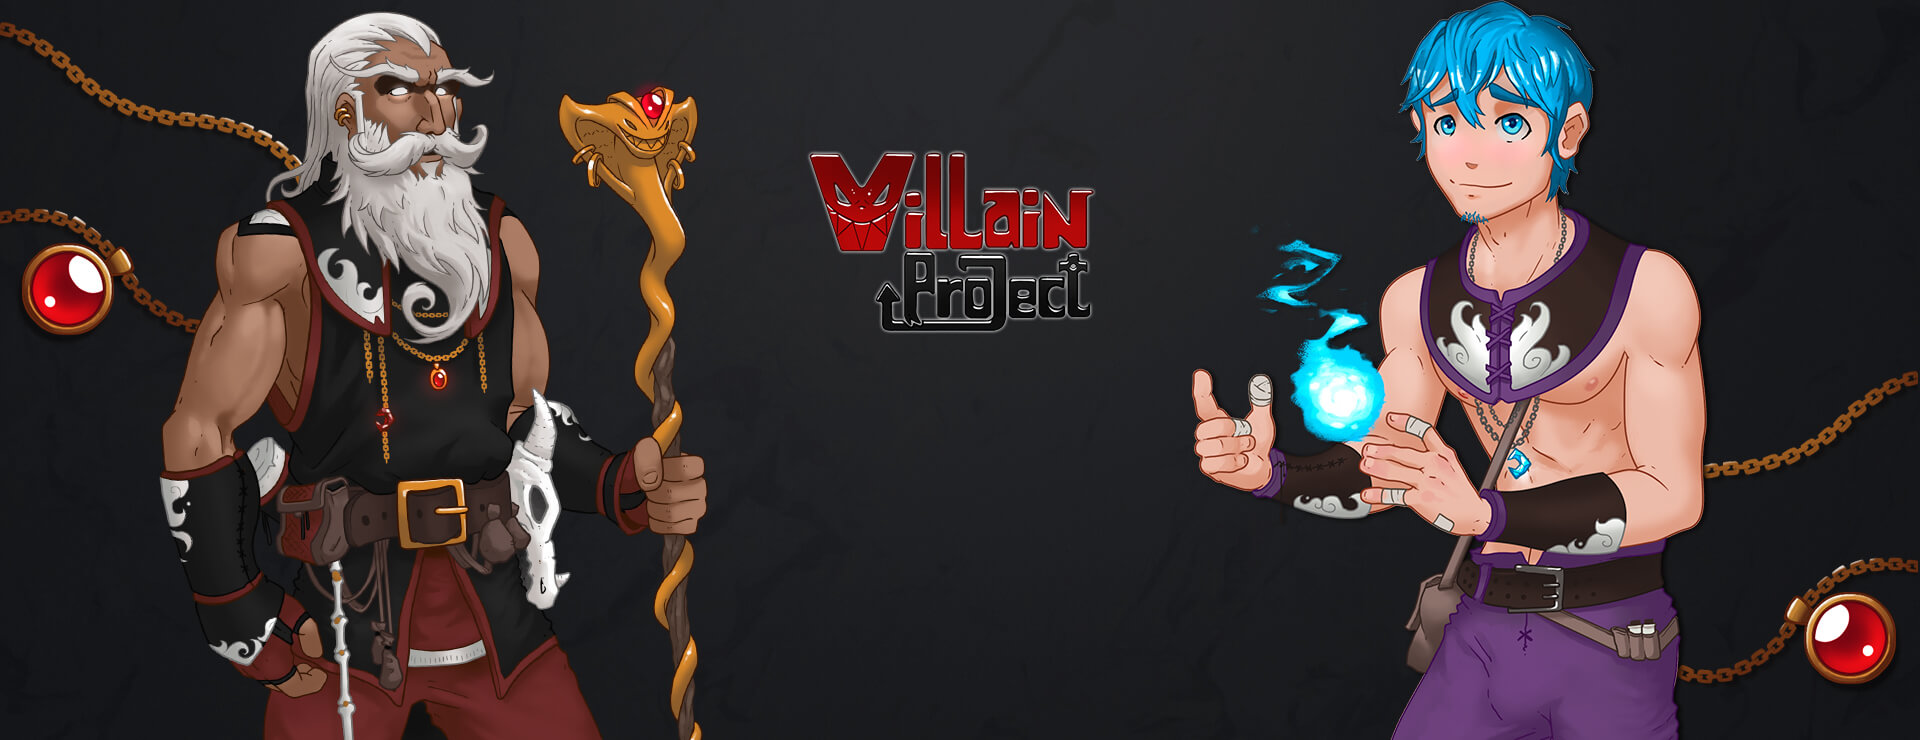 Villain Project - Casual Game